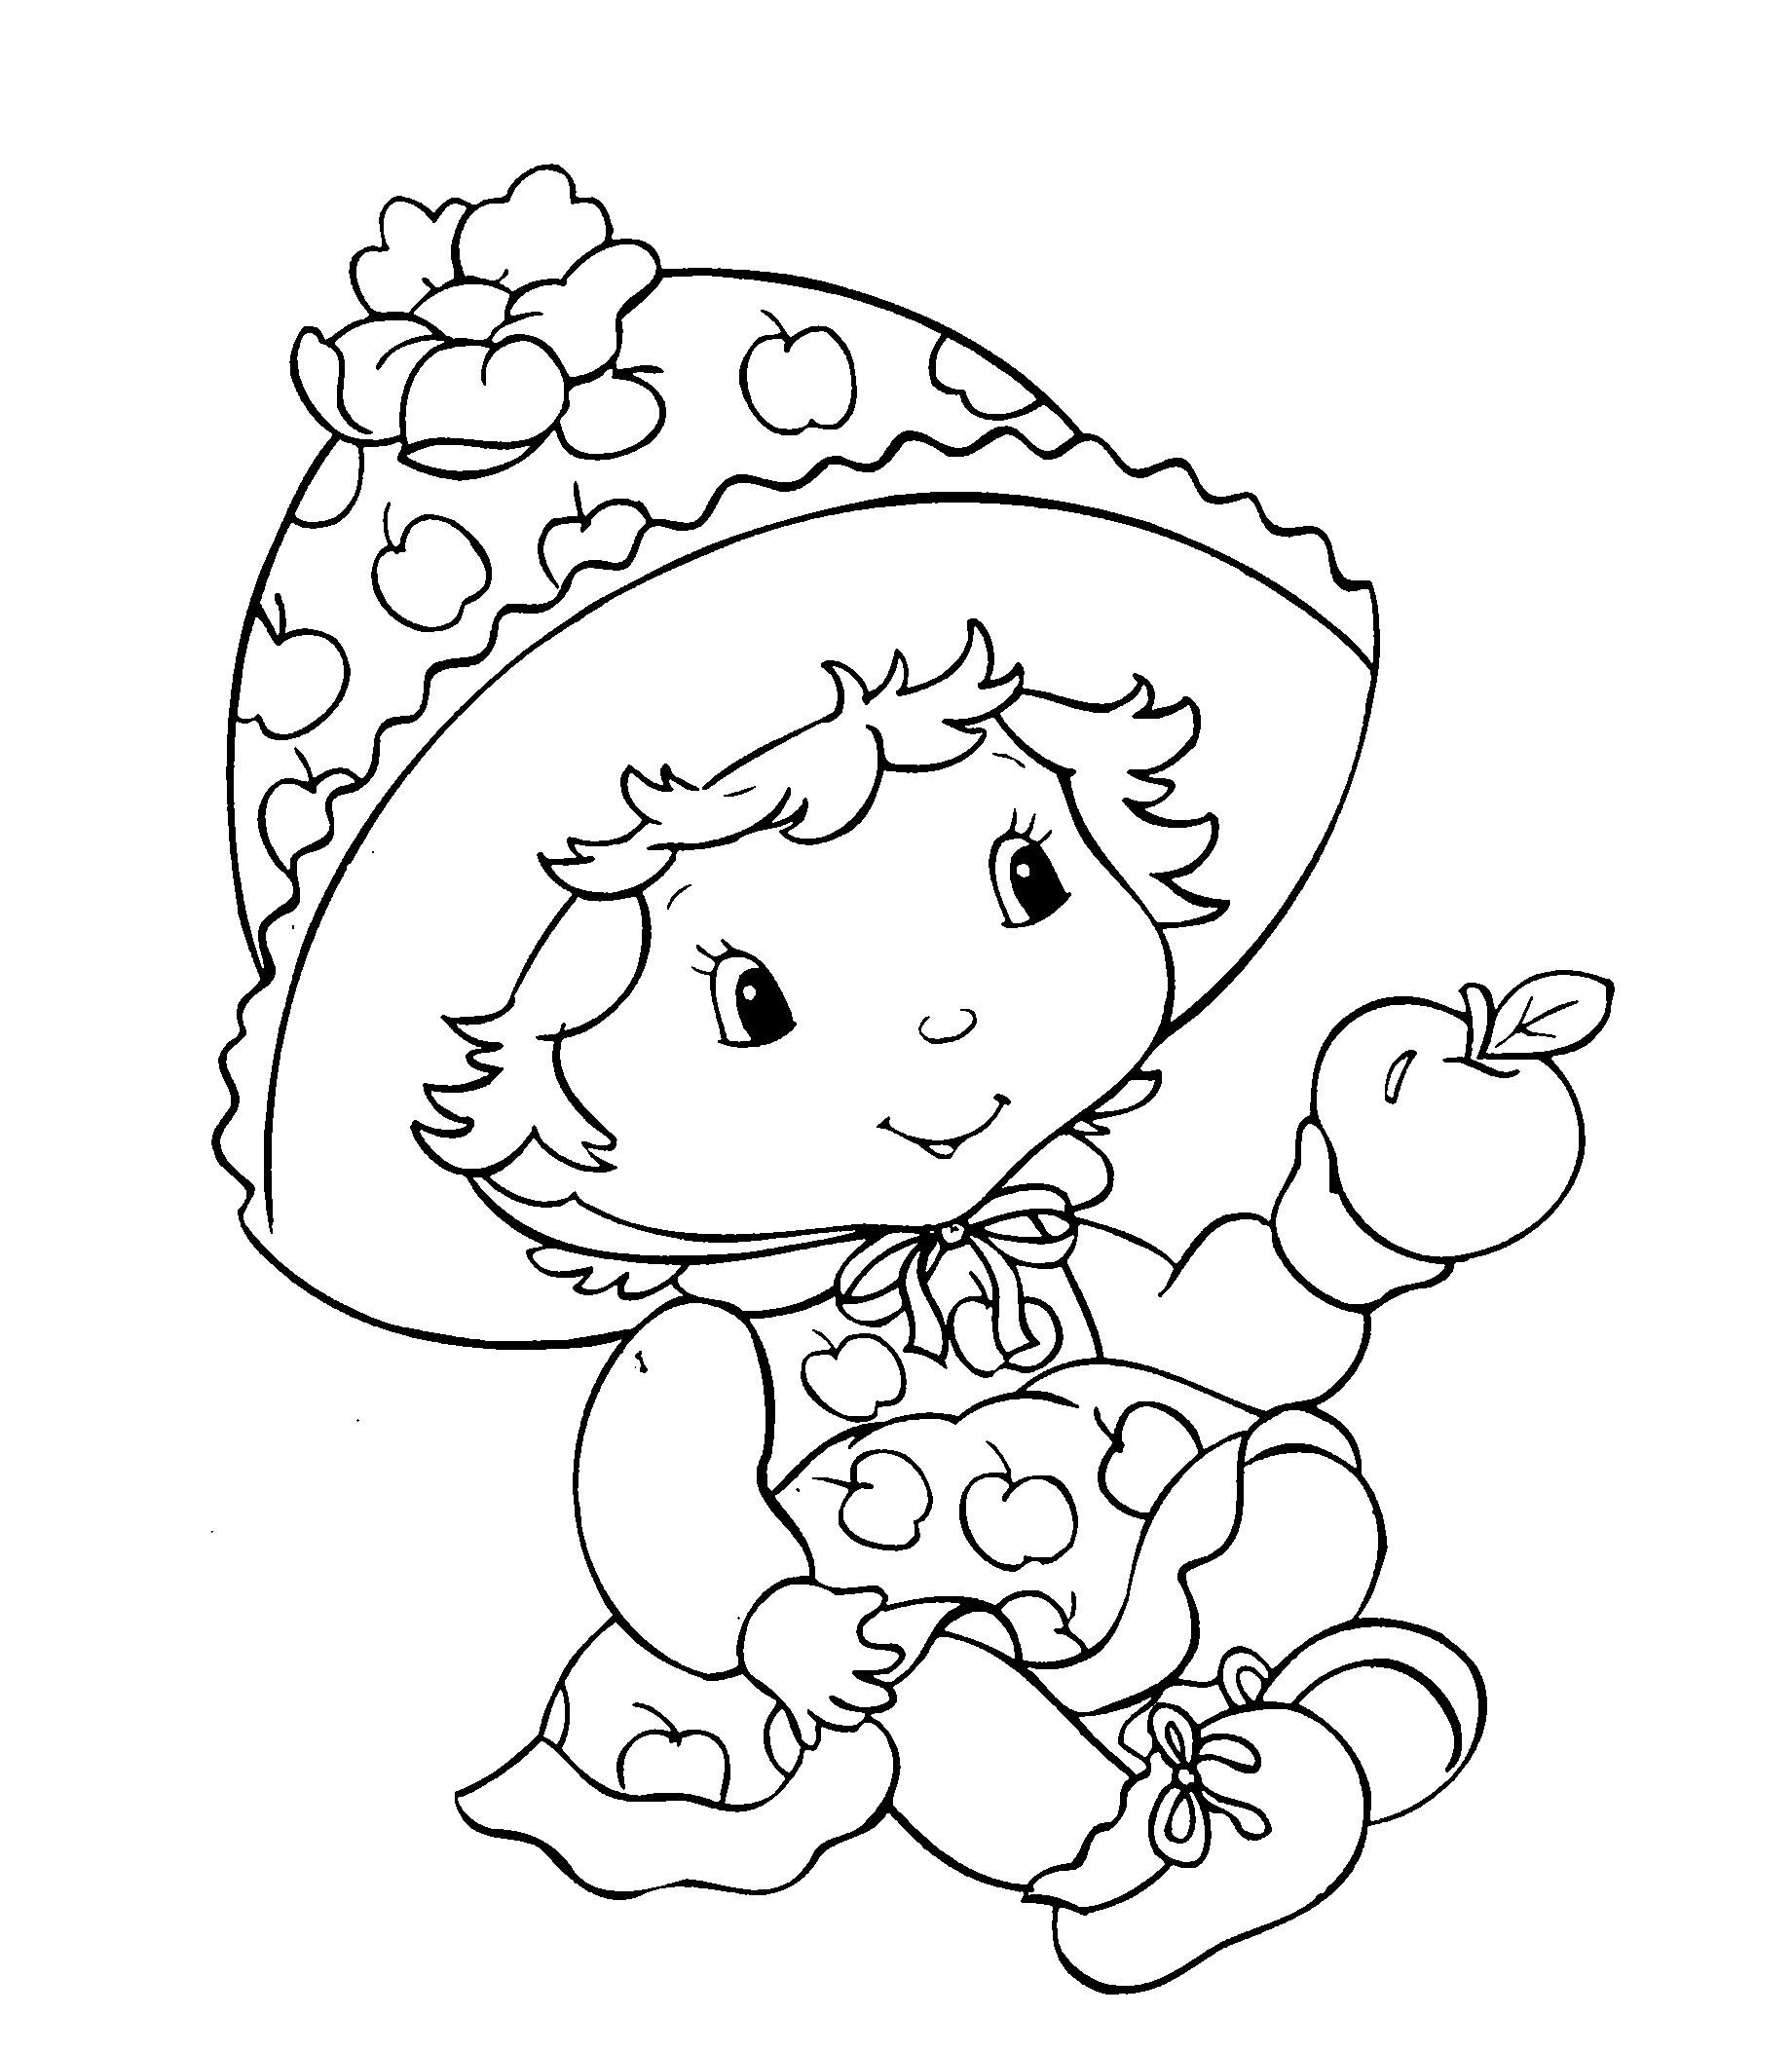 Strawberry Shortcake Coloring Pages / Cool coloring pages / 1